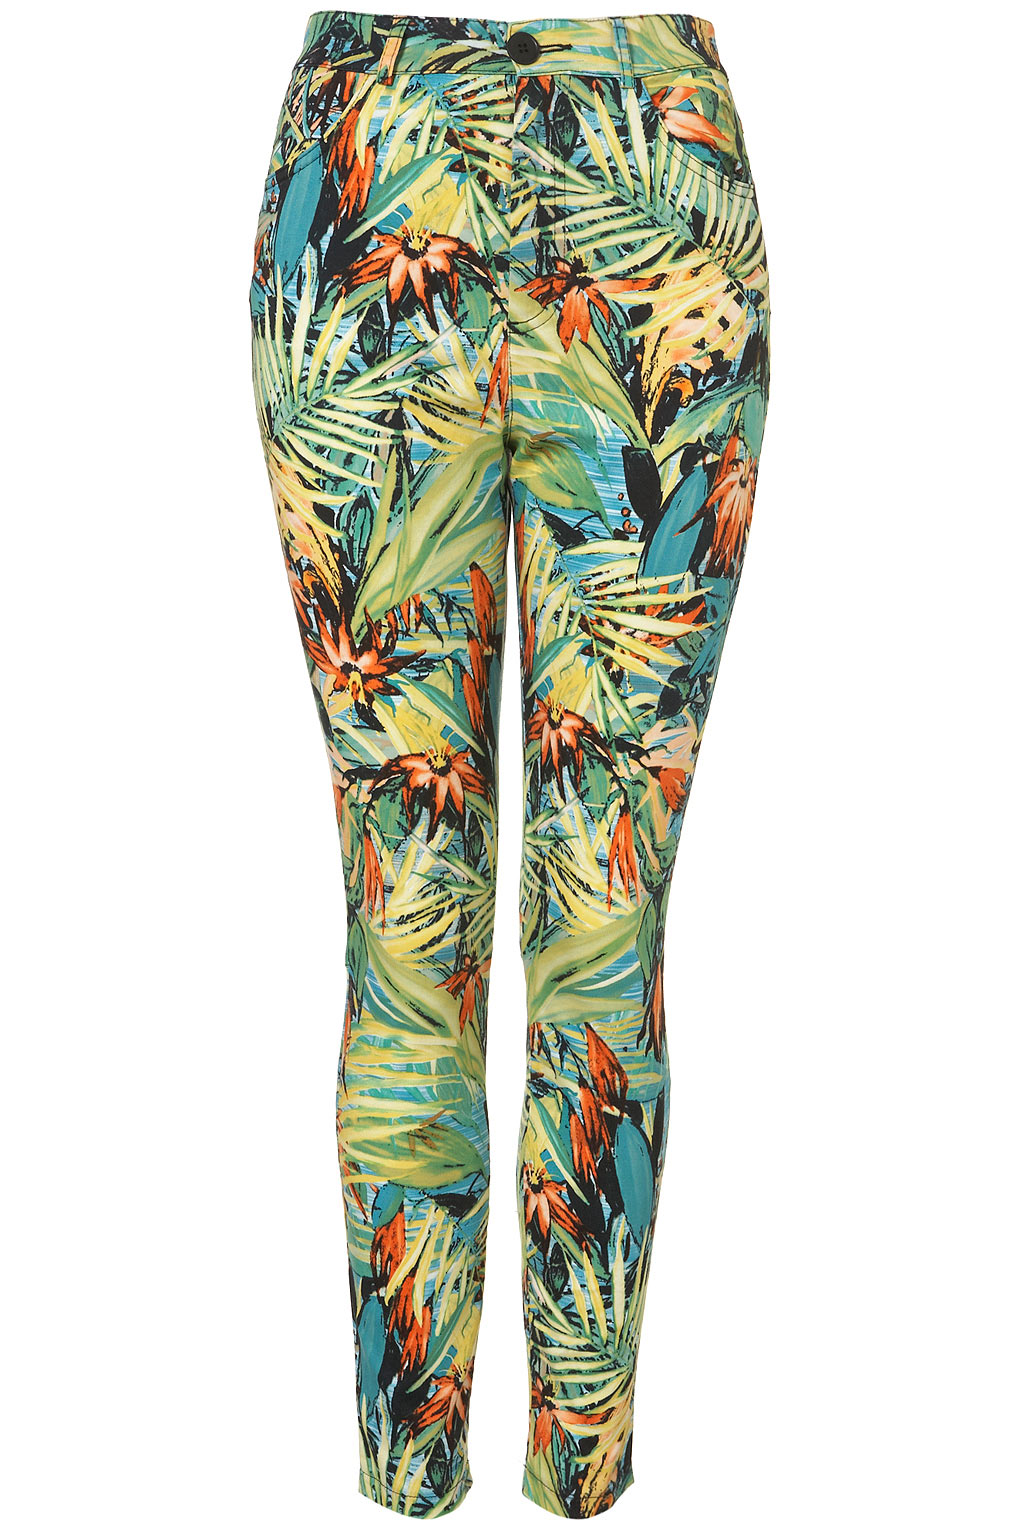 Diary of a High Street Girl: Trend Watch: Statement Trousers and Leggings